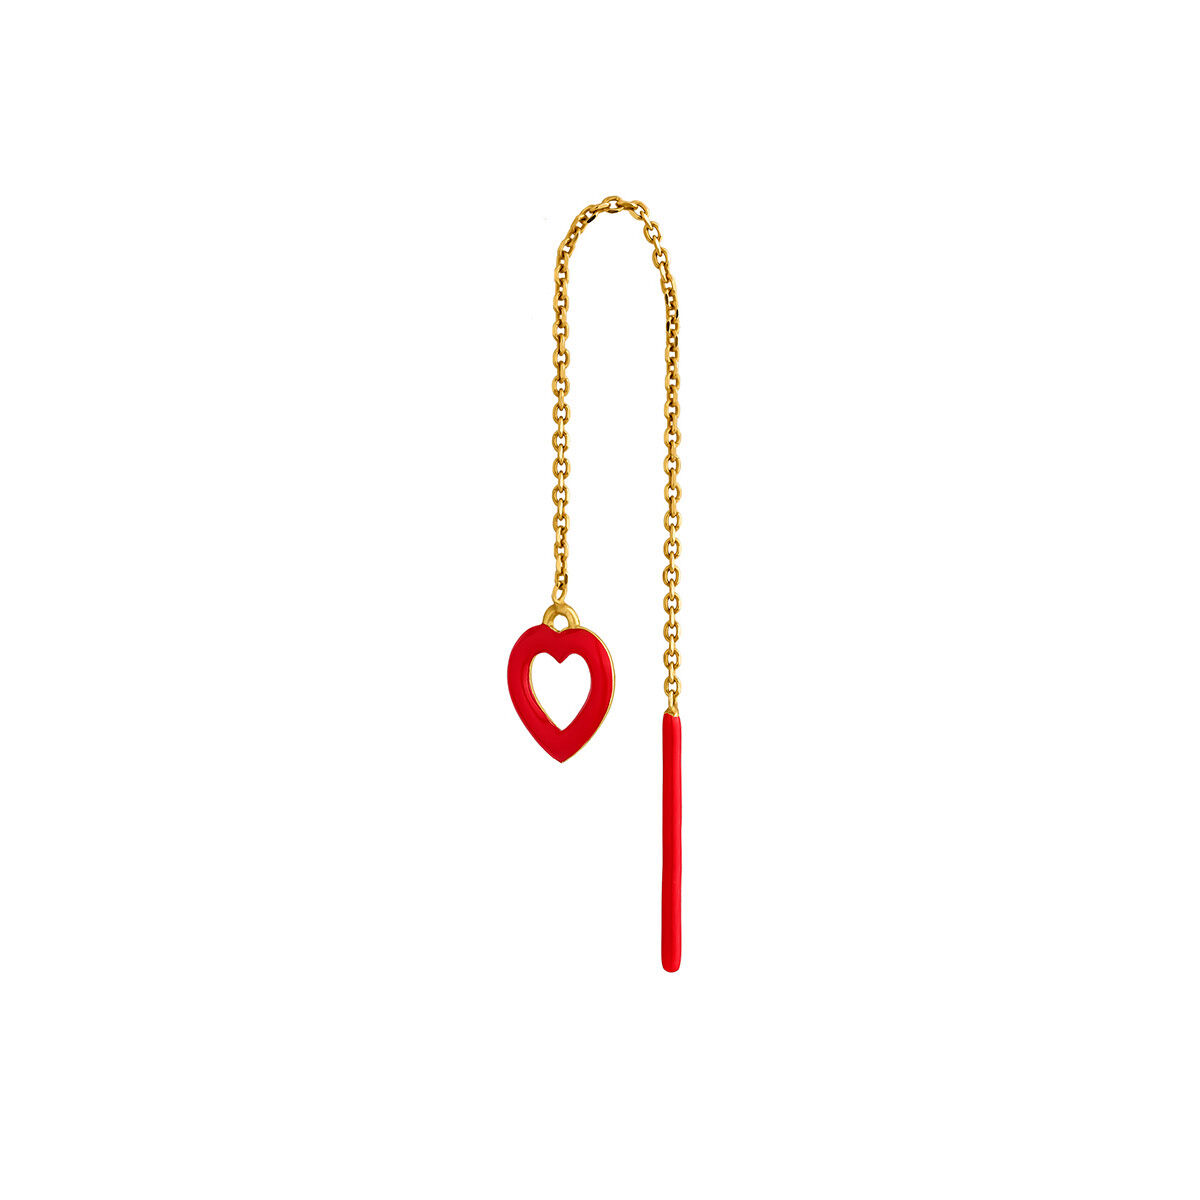 Long single chain earring in yellow gold-plated silver with a heart and red enamel, J05160-02-ROJENA-H, hi-res